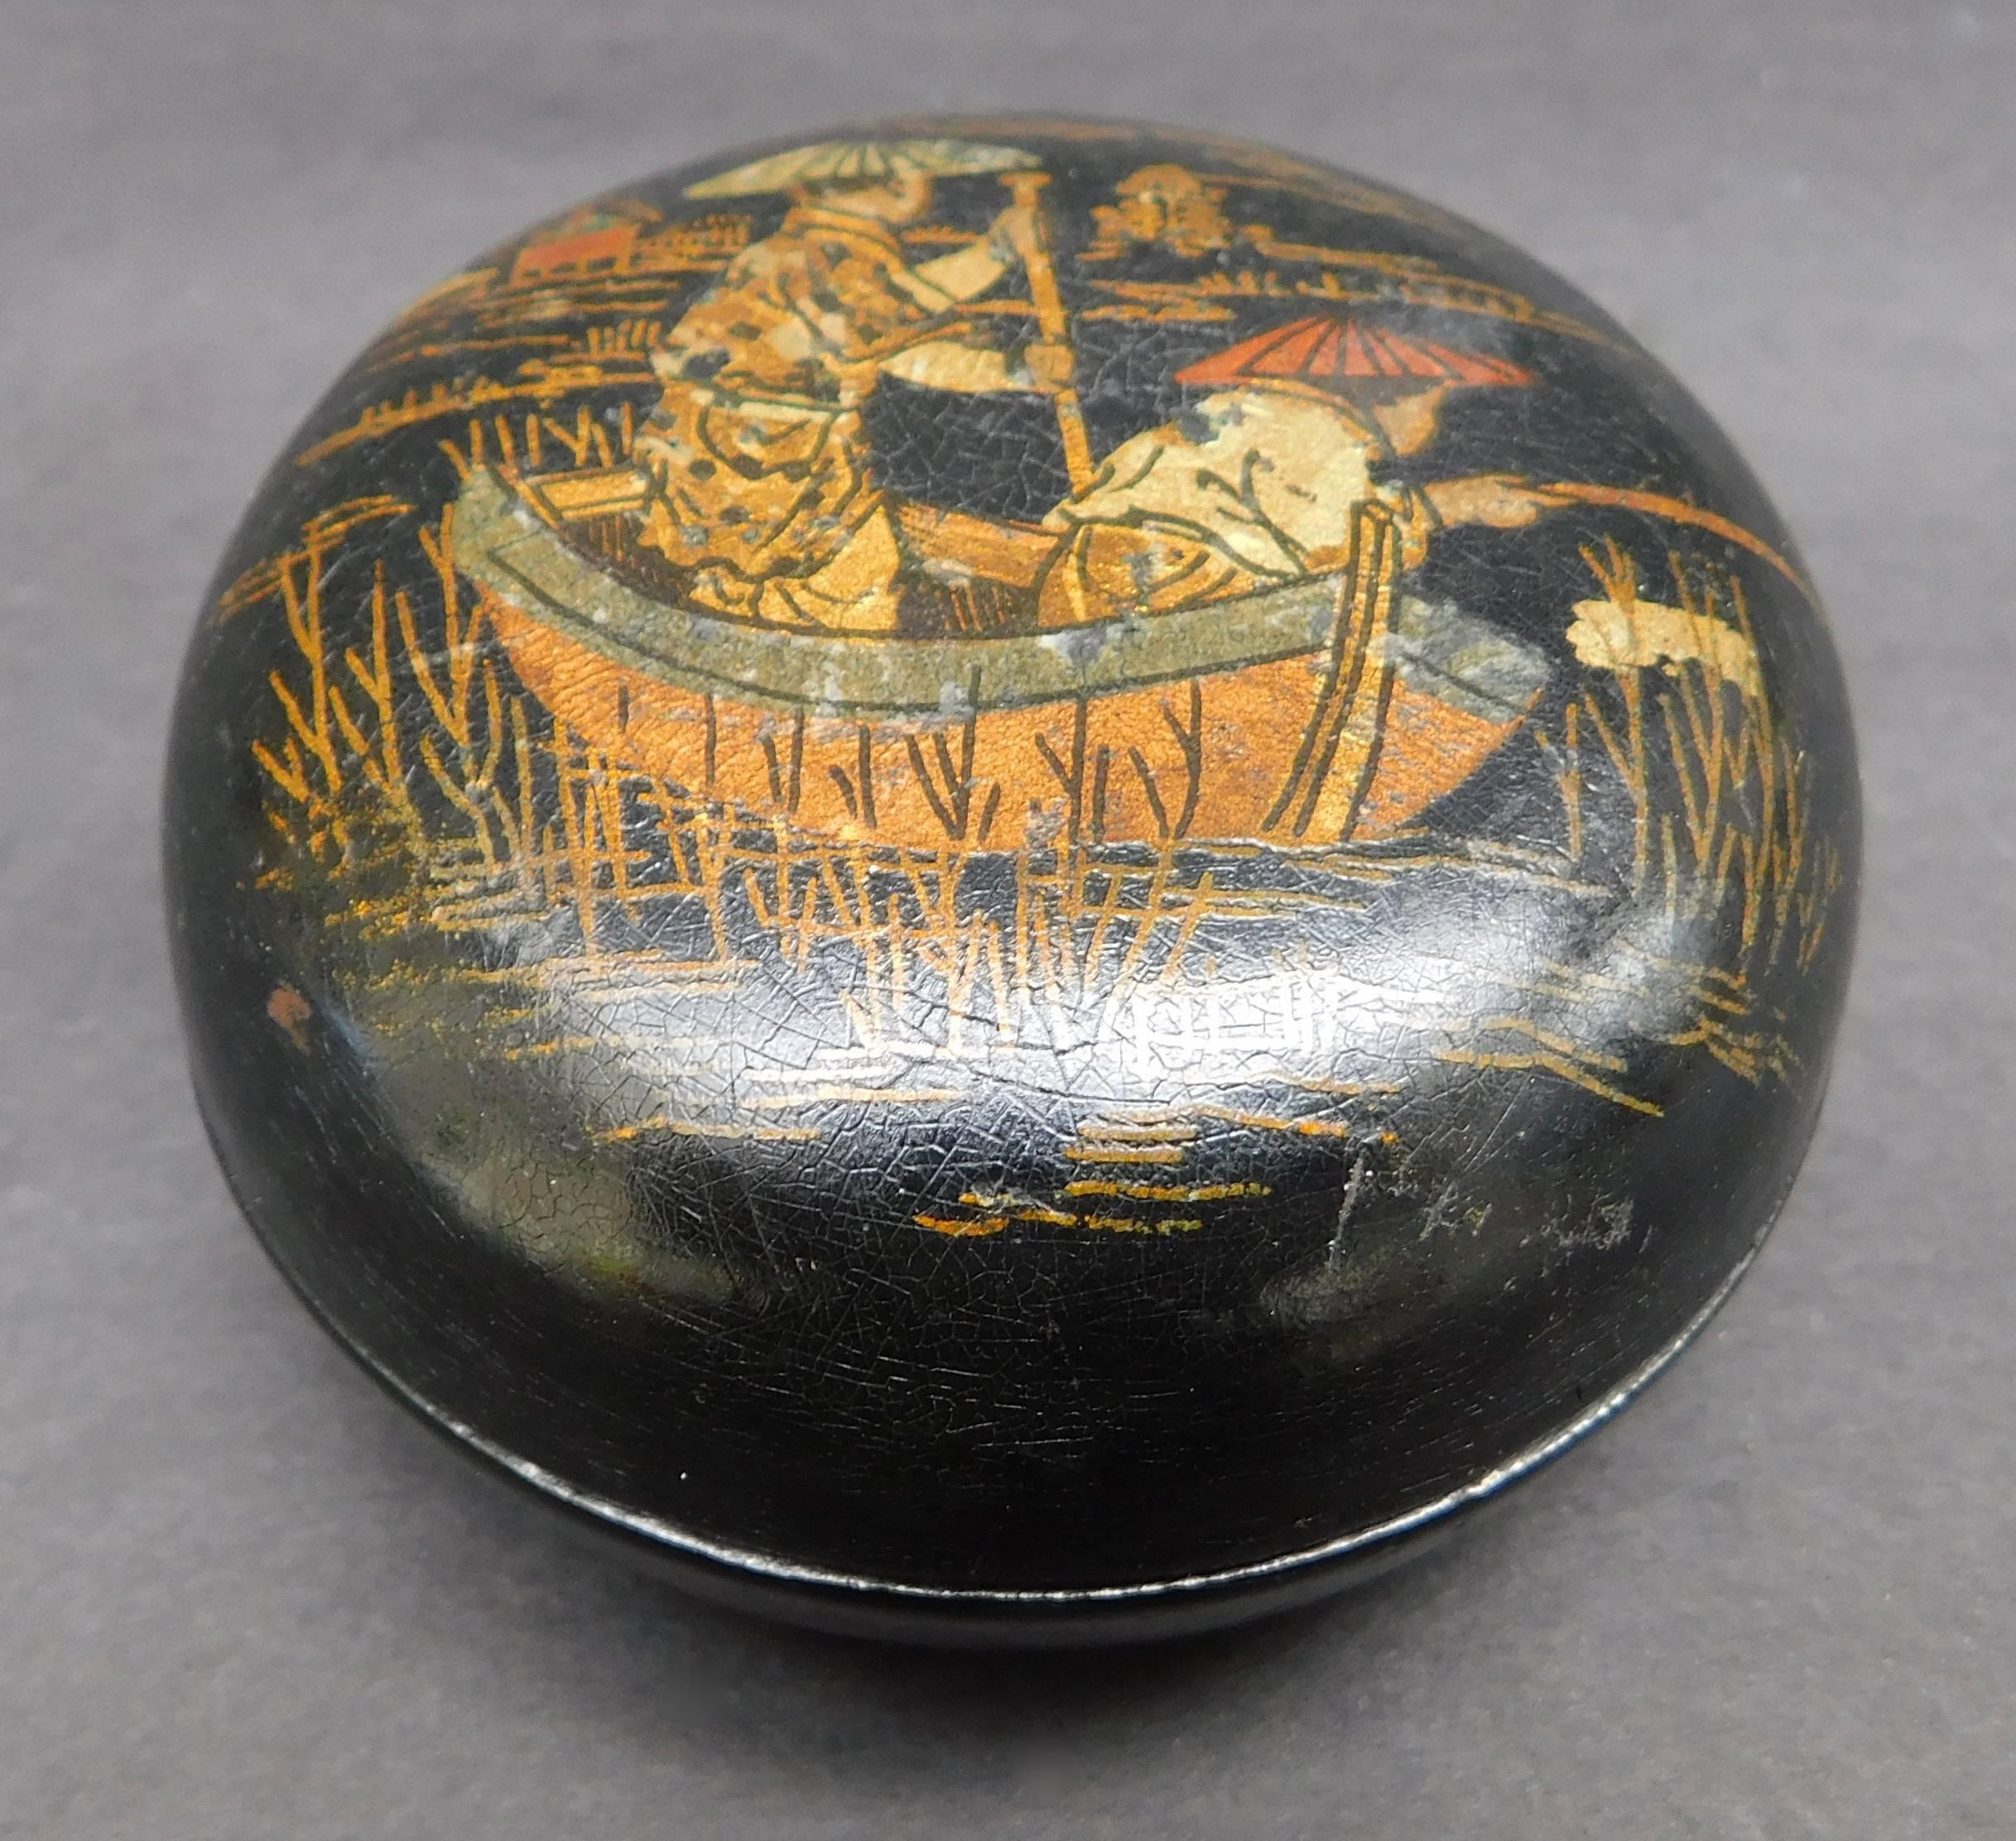  19th century French black papier mâché trinket box with decoupage chinoiserie scene. Elegant small size is perfect as a bedside table or desk accessory. 